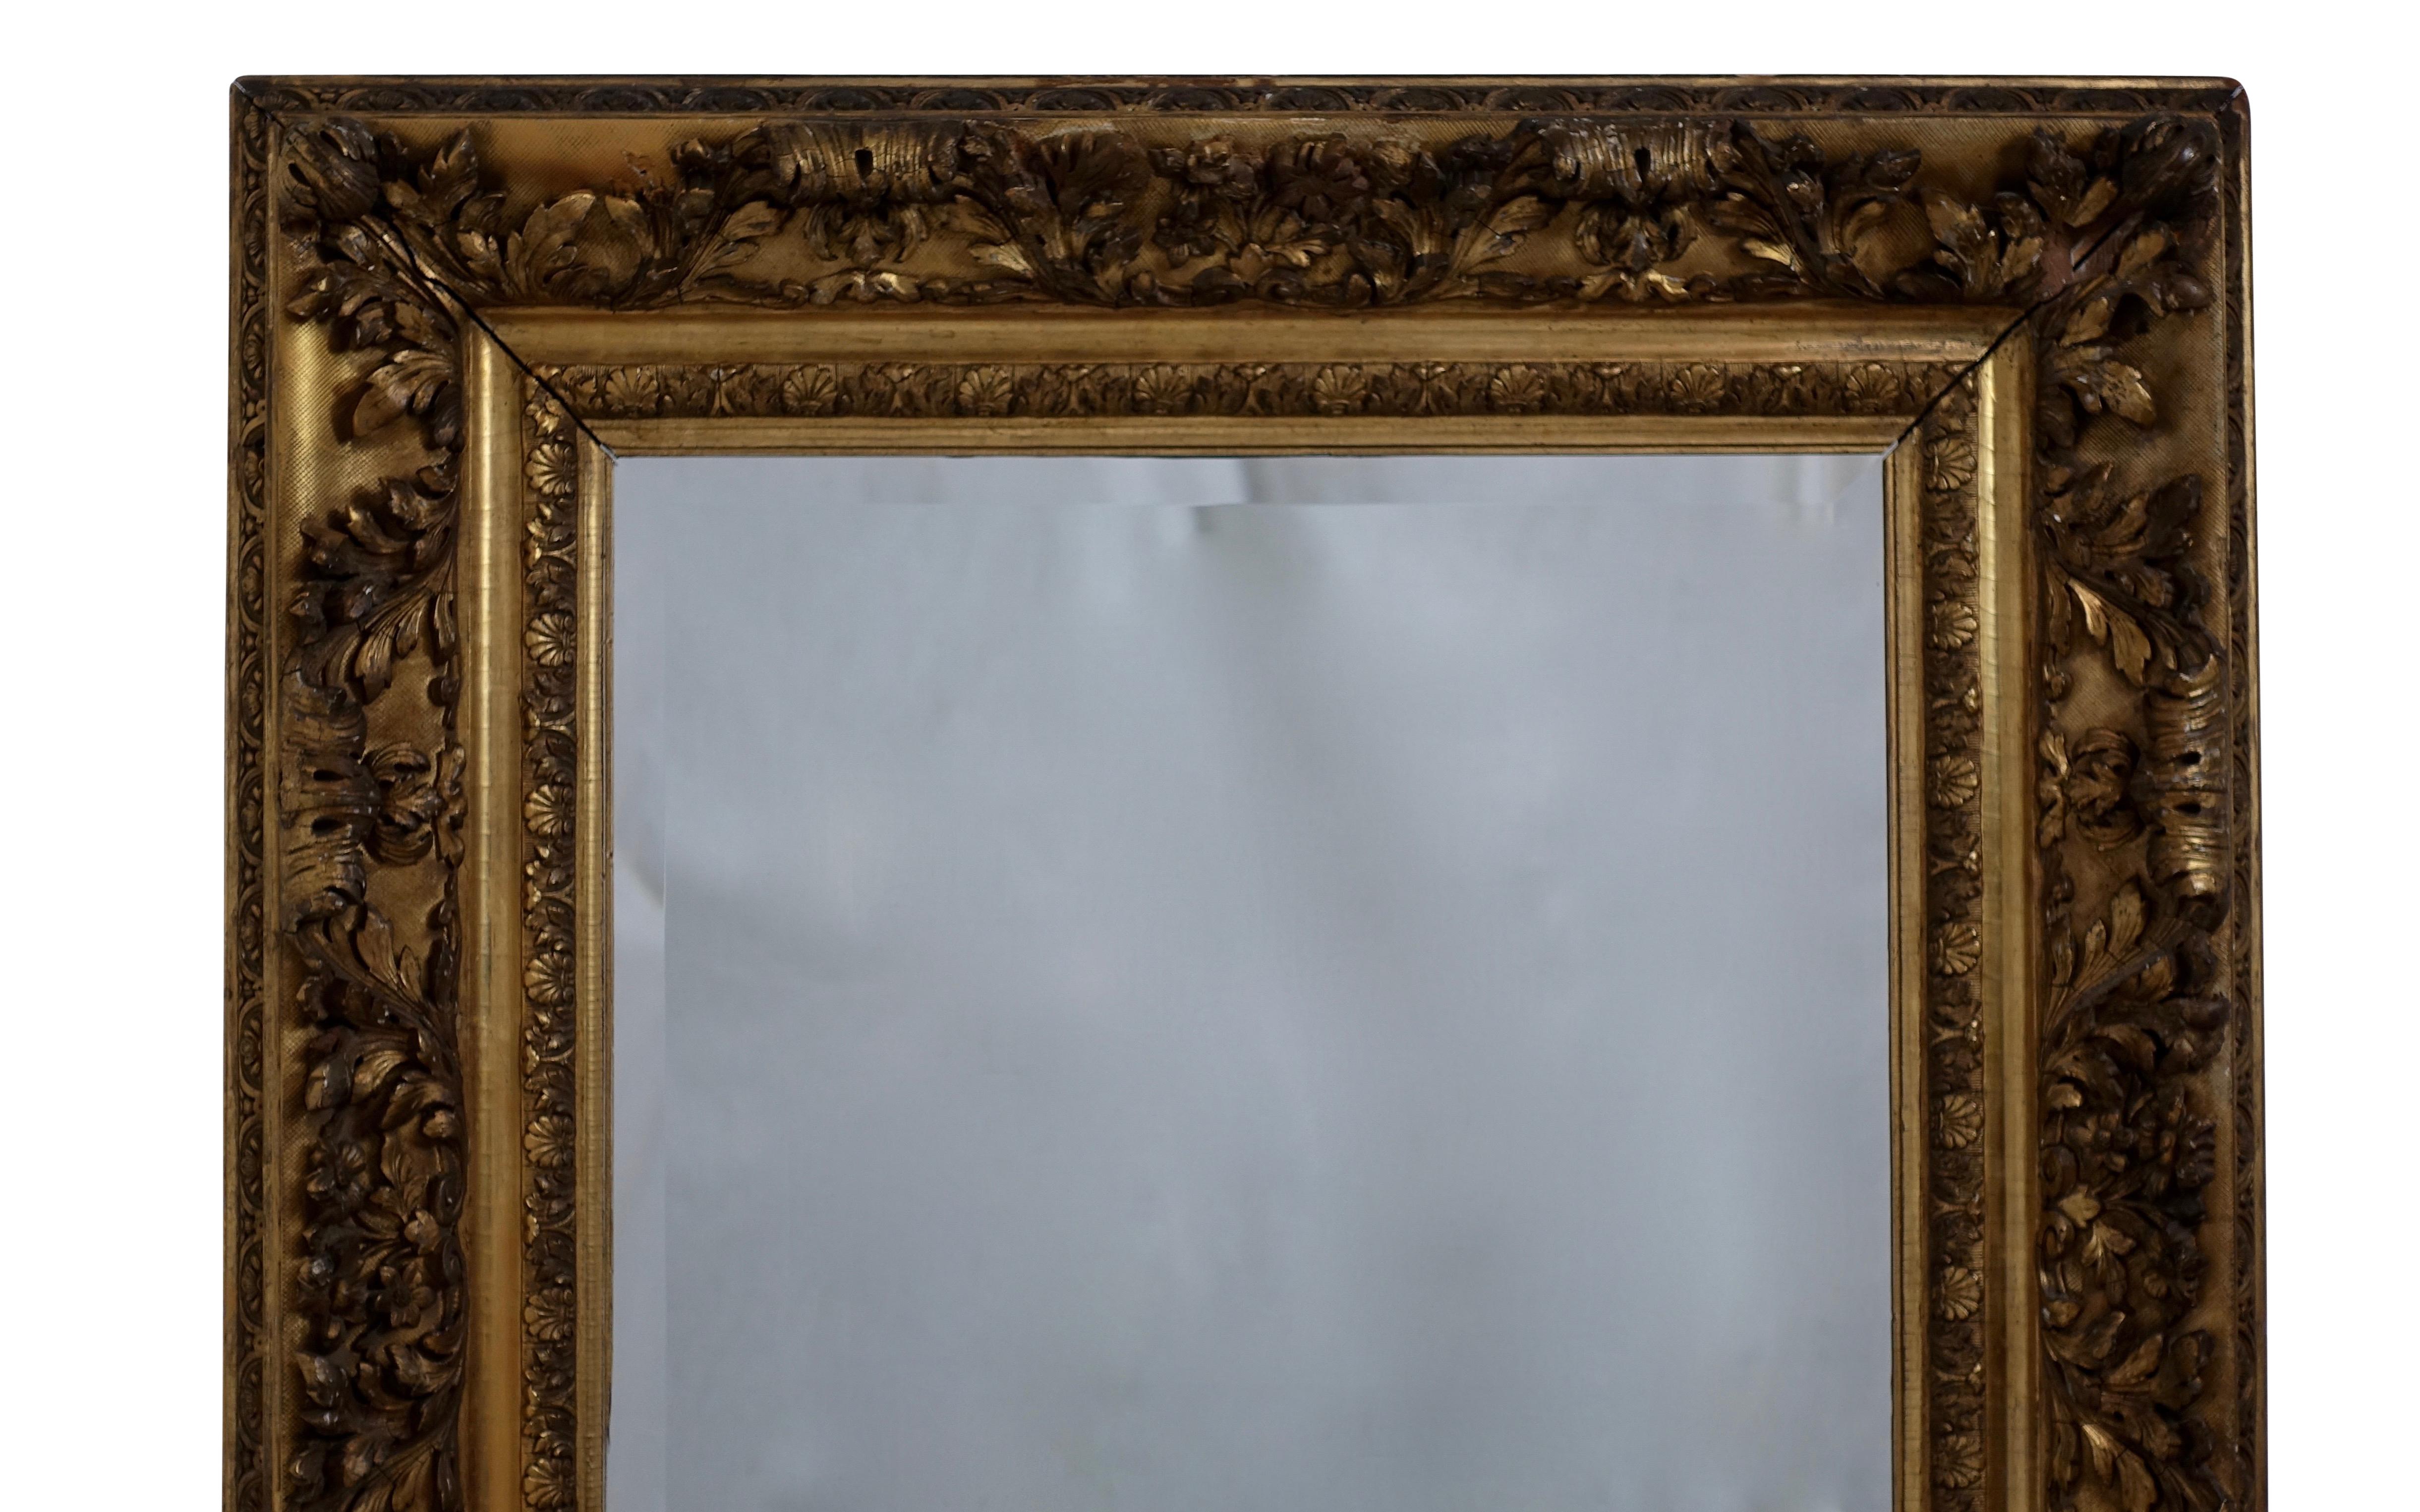 Unique gesso and carved gilt frame of flowers and acanthus leaves with a beveled glass mirror. English, 19th century.
Label on the reverse. Mirror of later date.